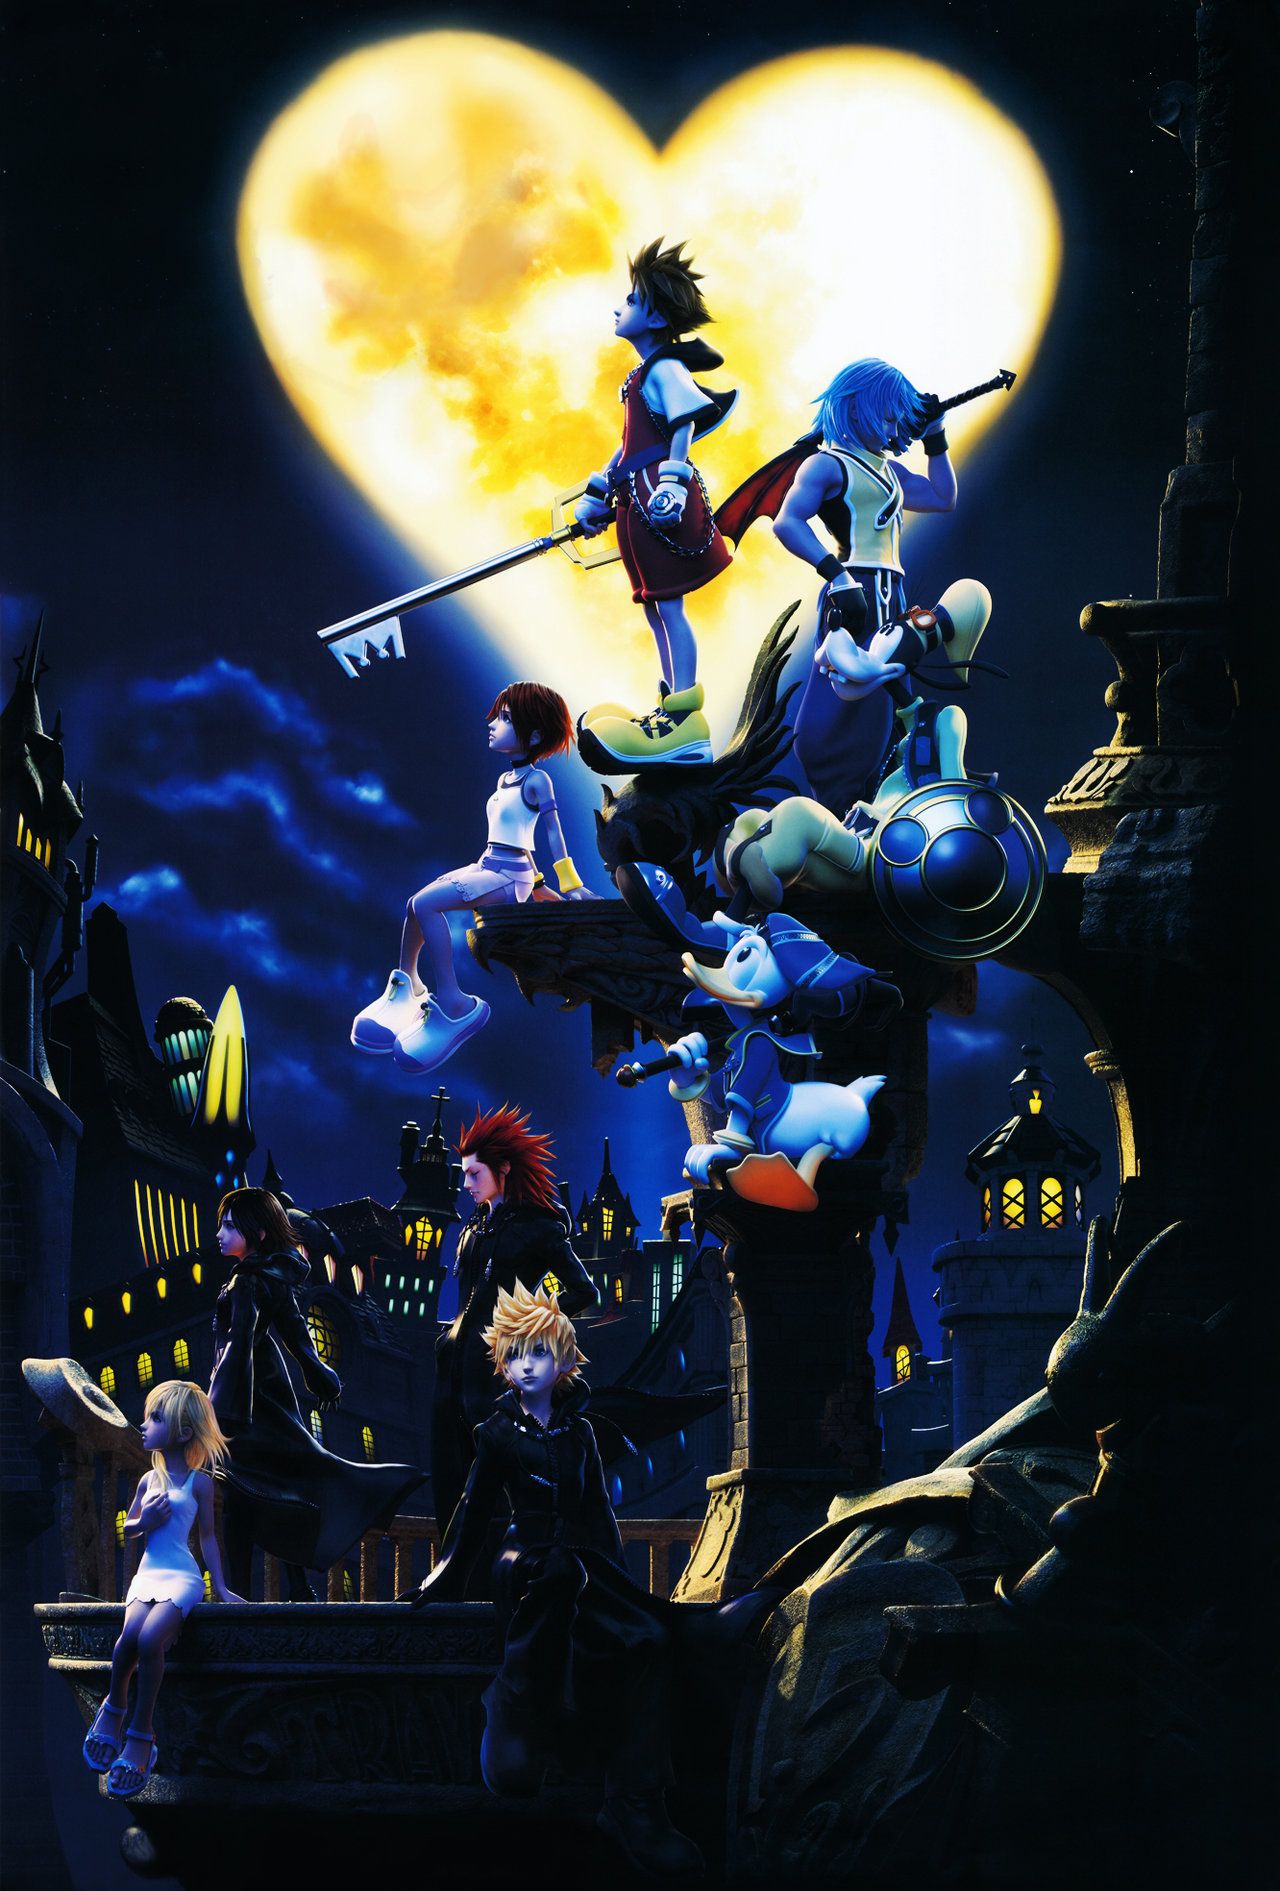 Free Kingdom Hearts Wallpapers - Kingdom Hearts 3 Game Poster , HD Wallpaper & Backgrounds